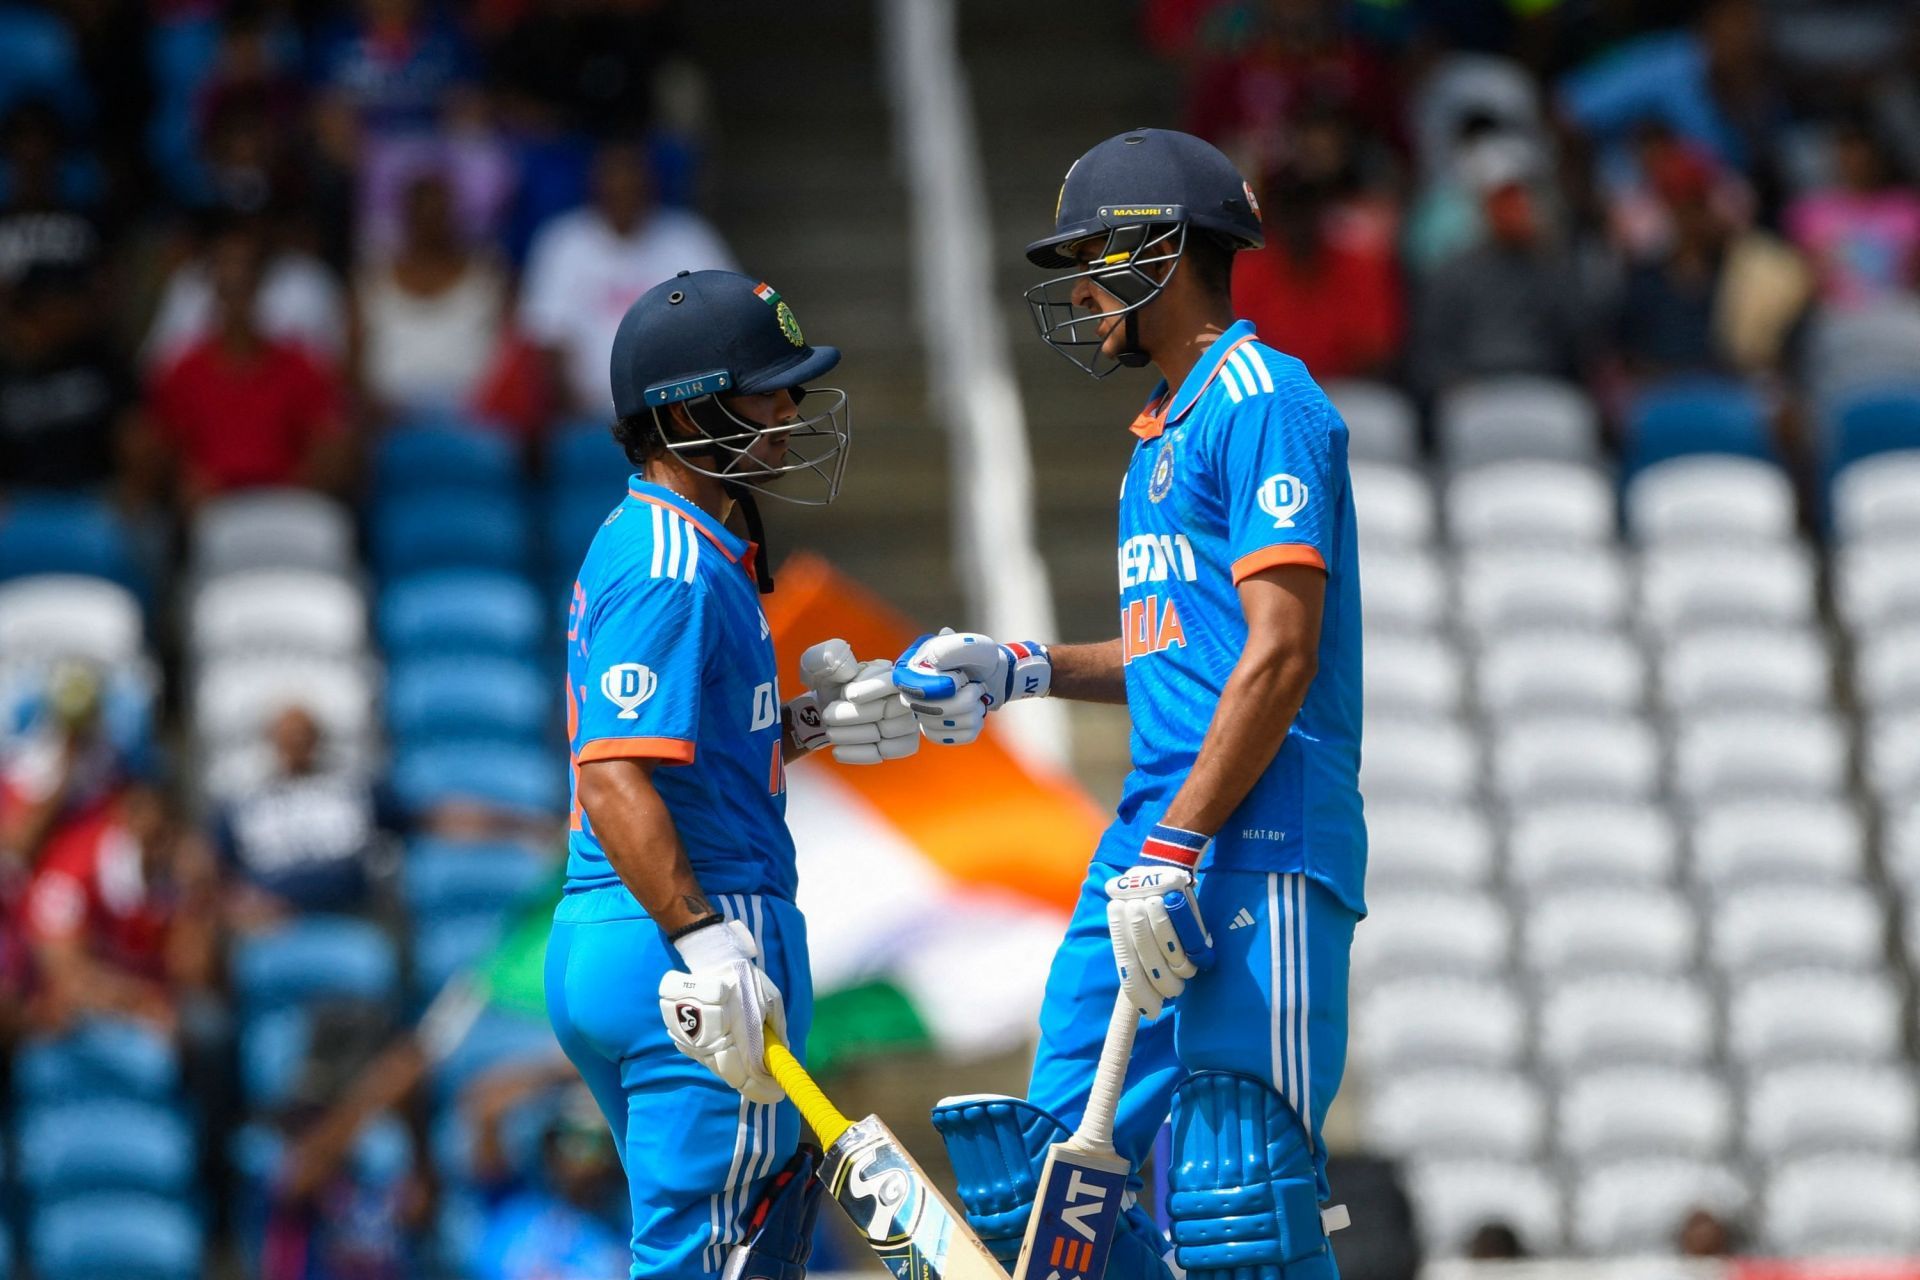 Ishan Kishan and Shubman Gill dished out underwhelming performances in the first two T20Is. [P/C: BCCI]